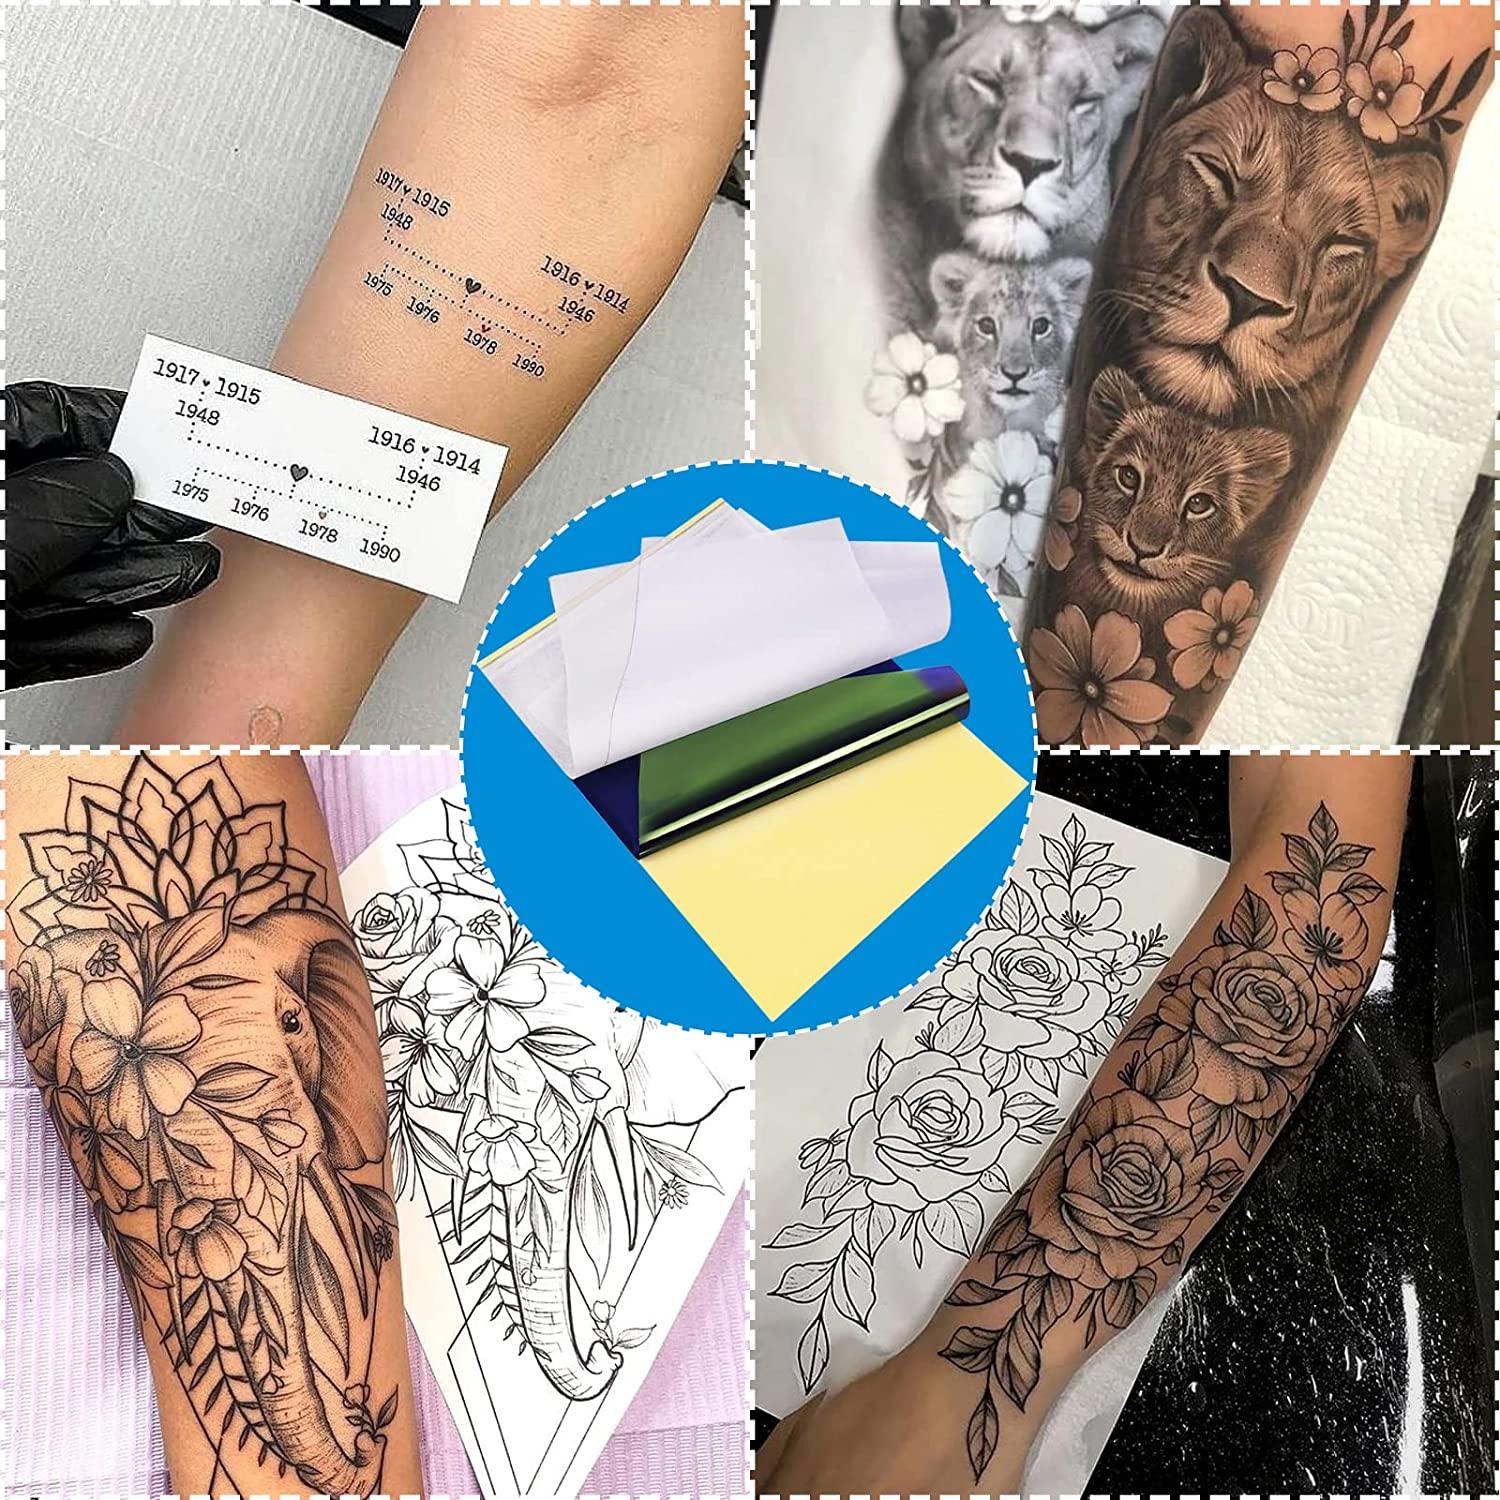  Tattoo Skin Practice with Stencil Paper, Urknall 40PCS 1mm  Thick Fake Skin and Tattoo Transfer Paper Kit Including 10PCS Tattoo Skin  and 30PCS Tattoo Stencil Paper for Tattoo Supplies 